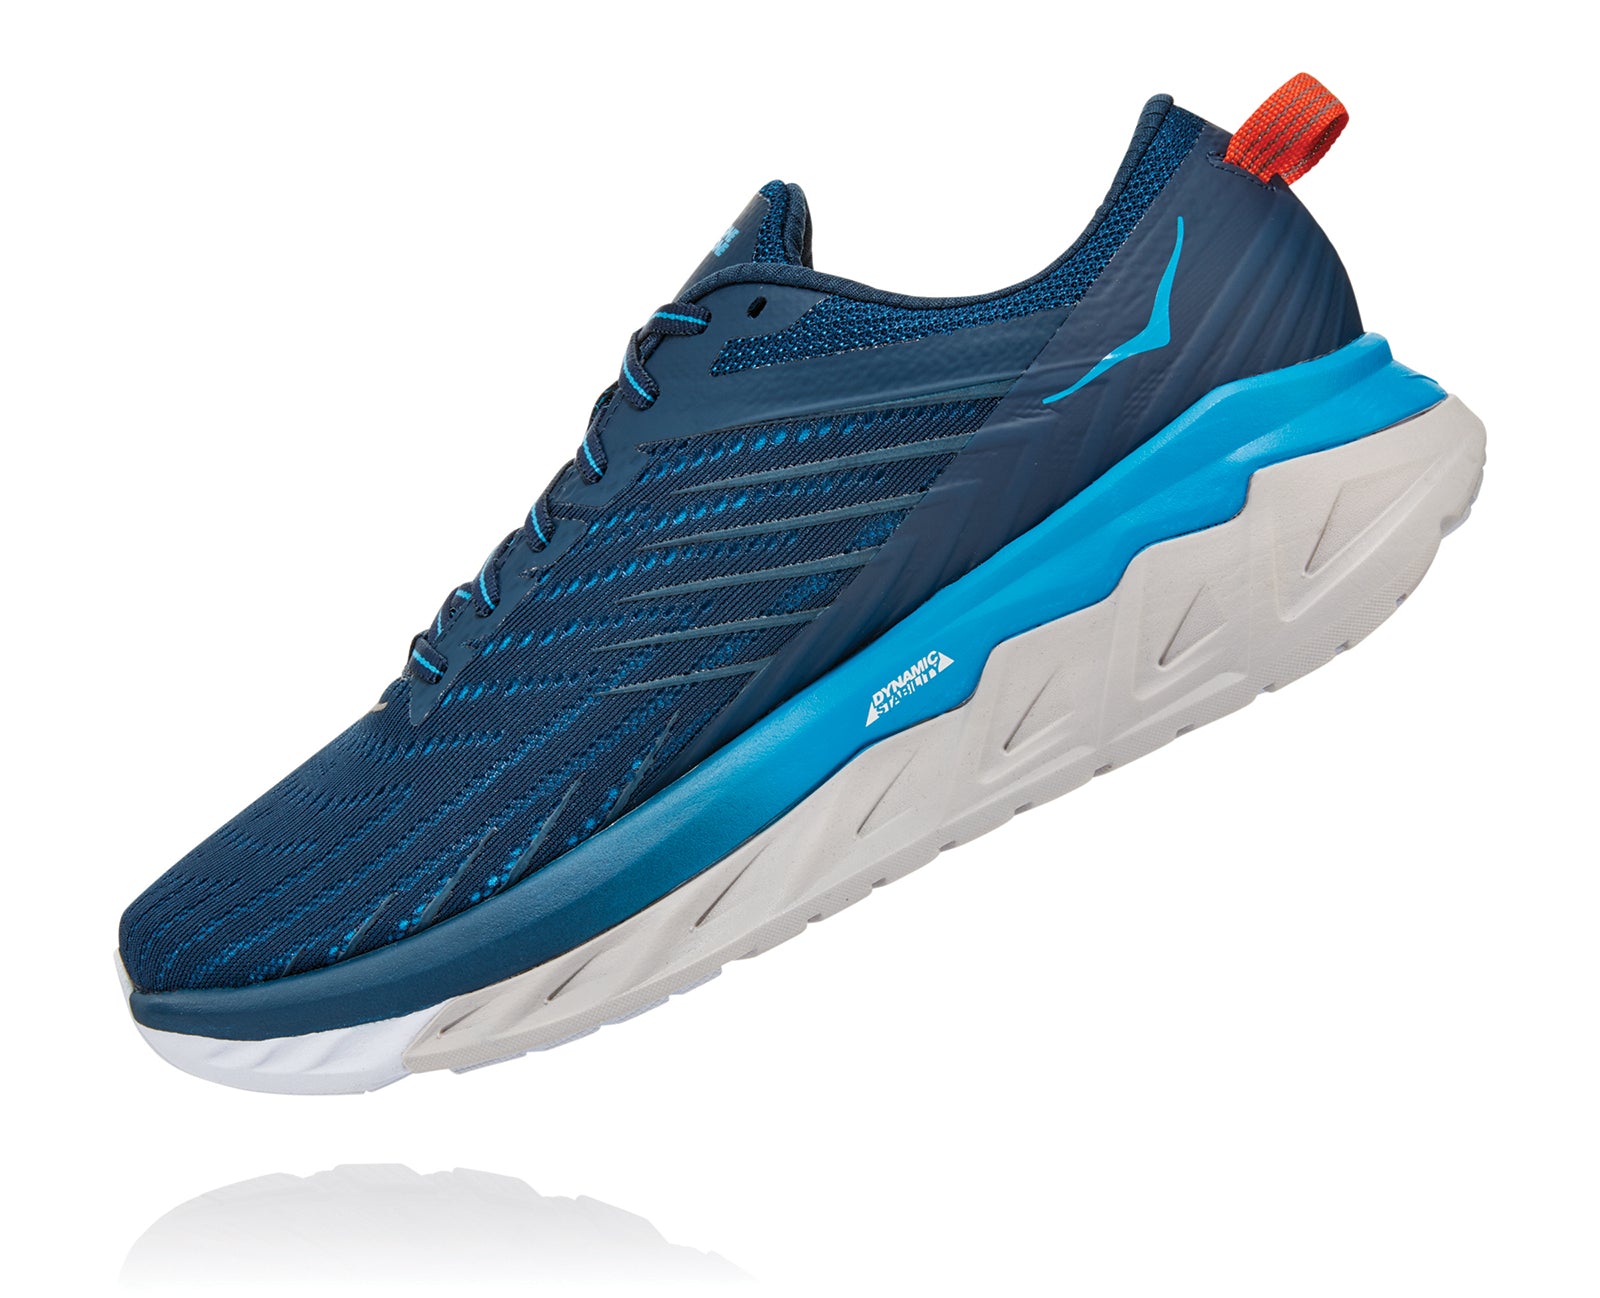 Blue and grey design support running shoe for men.